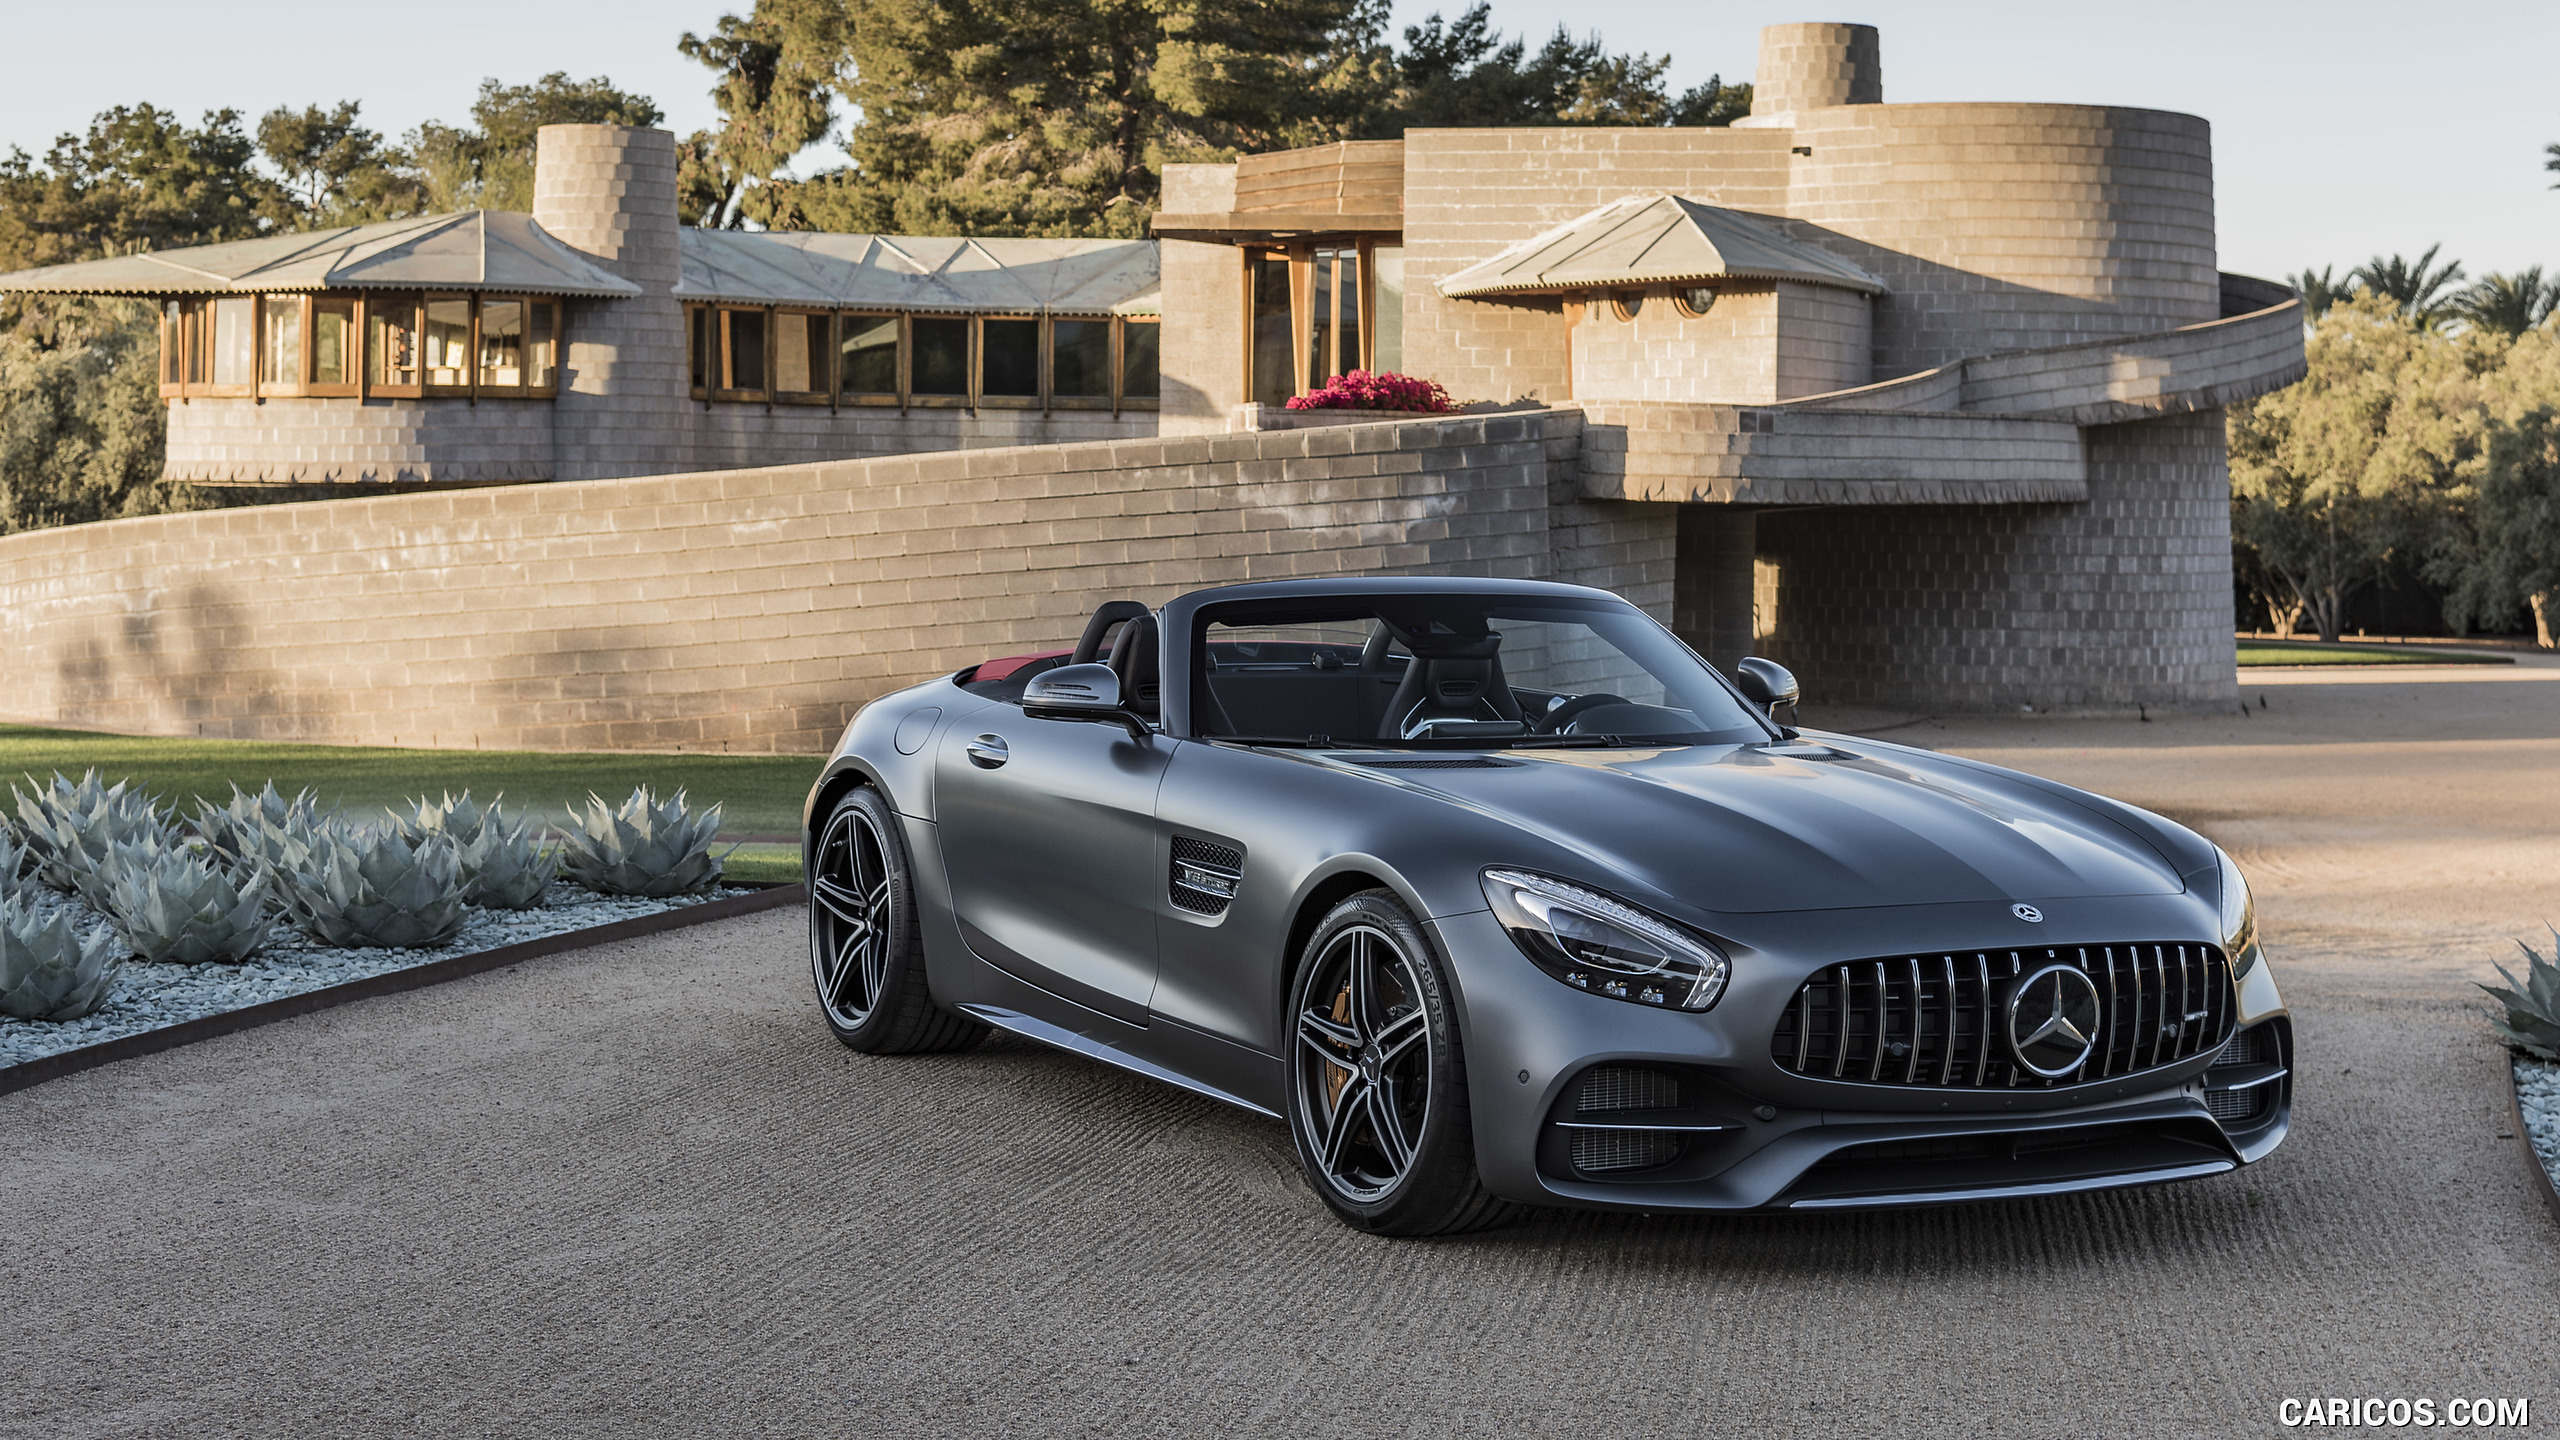 2018 Mercedes-AMG GT C Roadster - Front Three-Quarter, #327 of 350